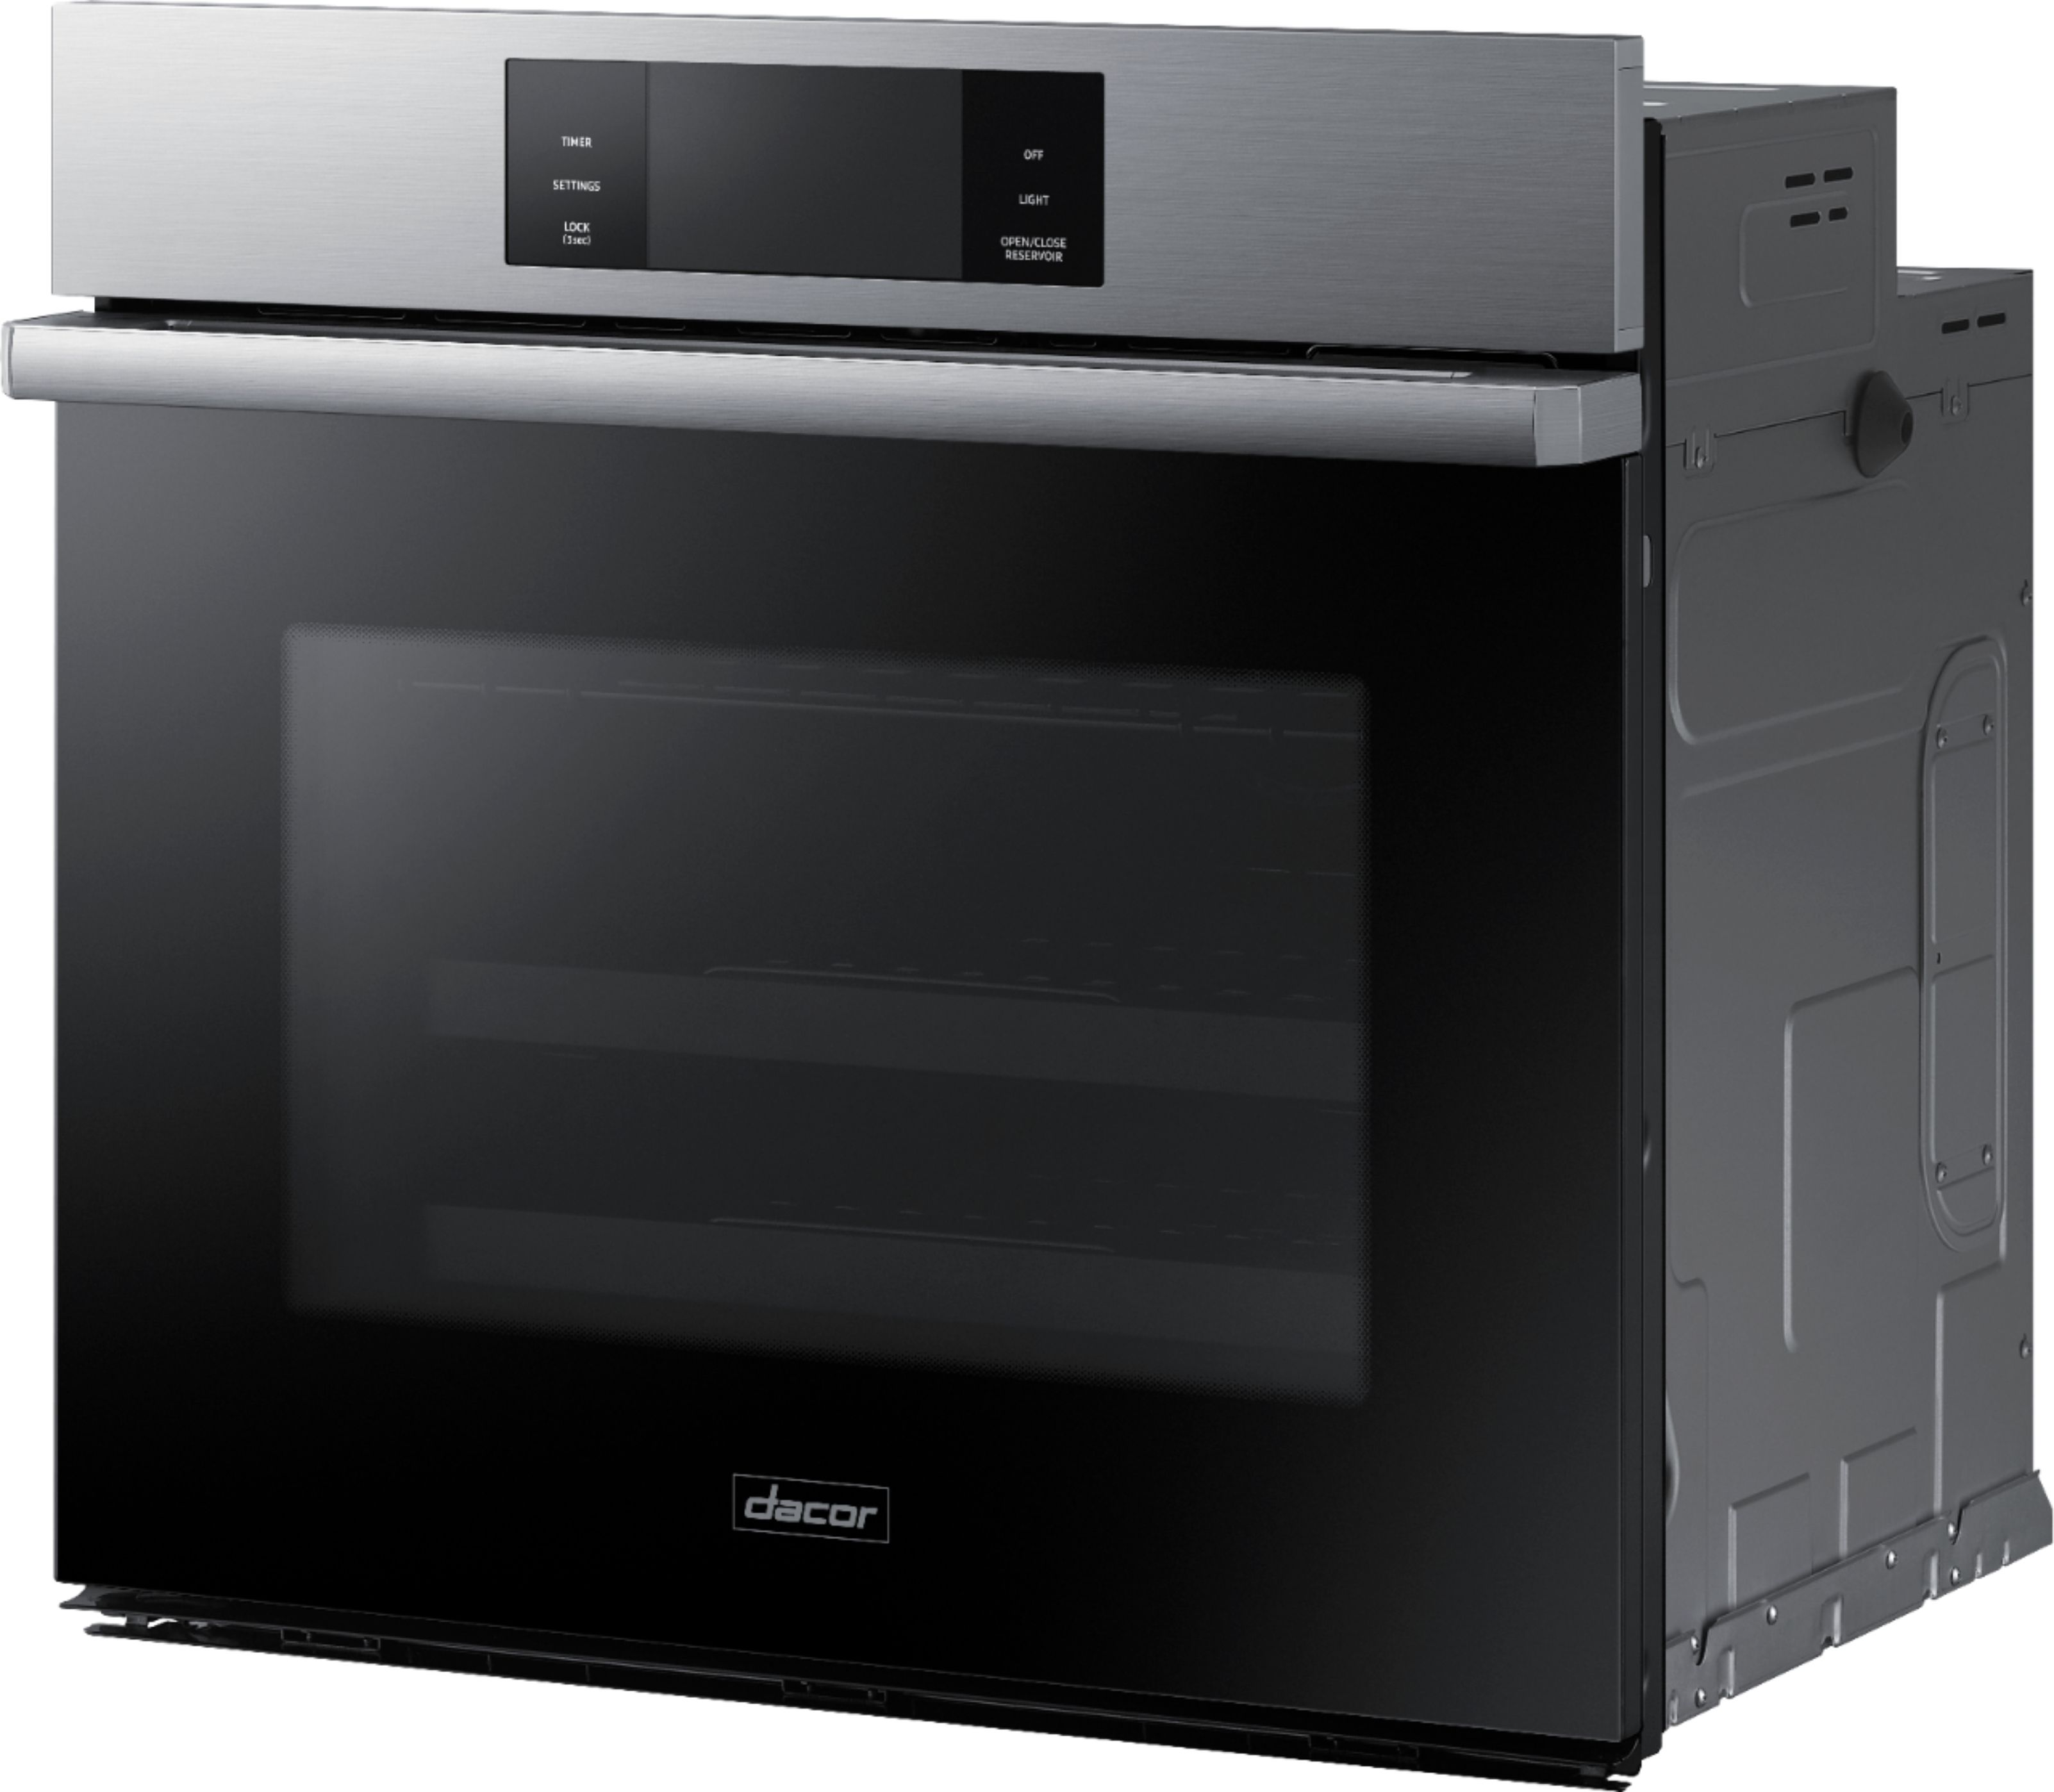 Angle View: Bertazzoni - Professional Series 29.8" Built-In Single Electric Convection Wall Oven - Stainless steel